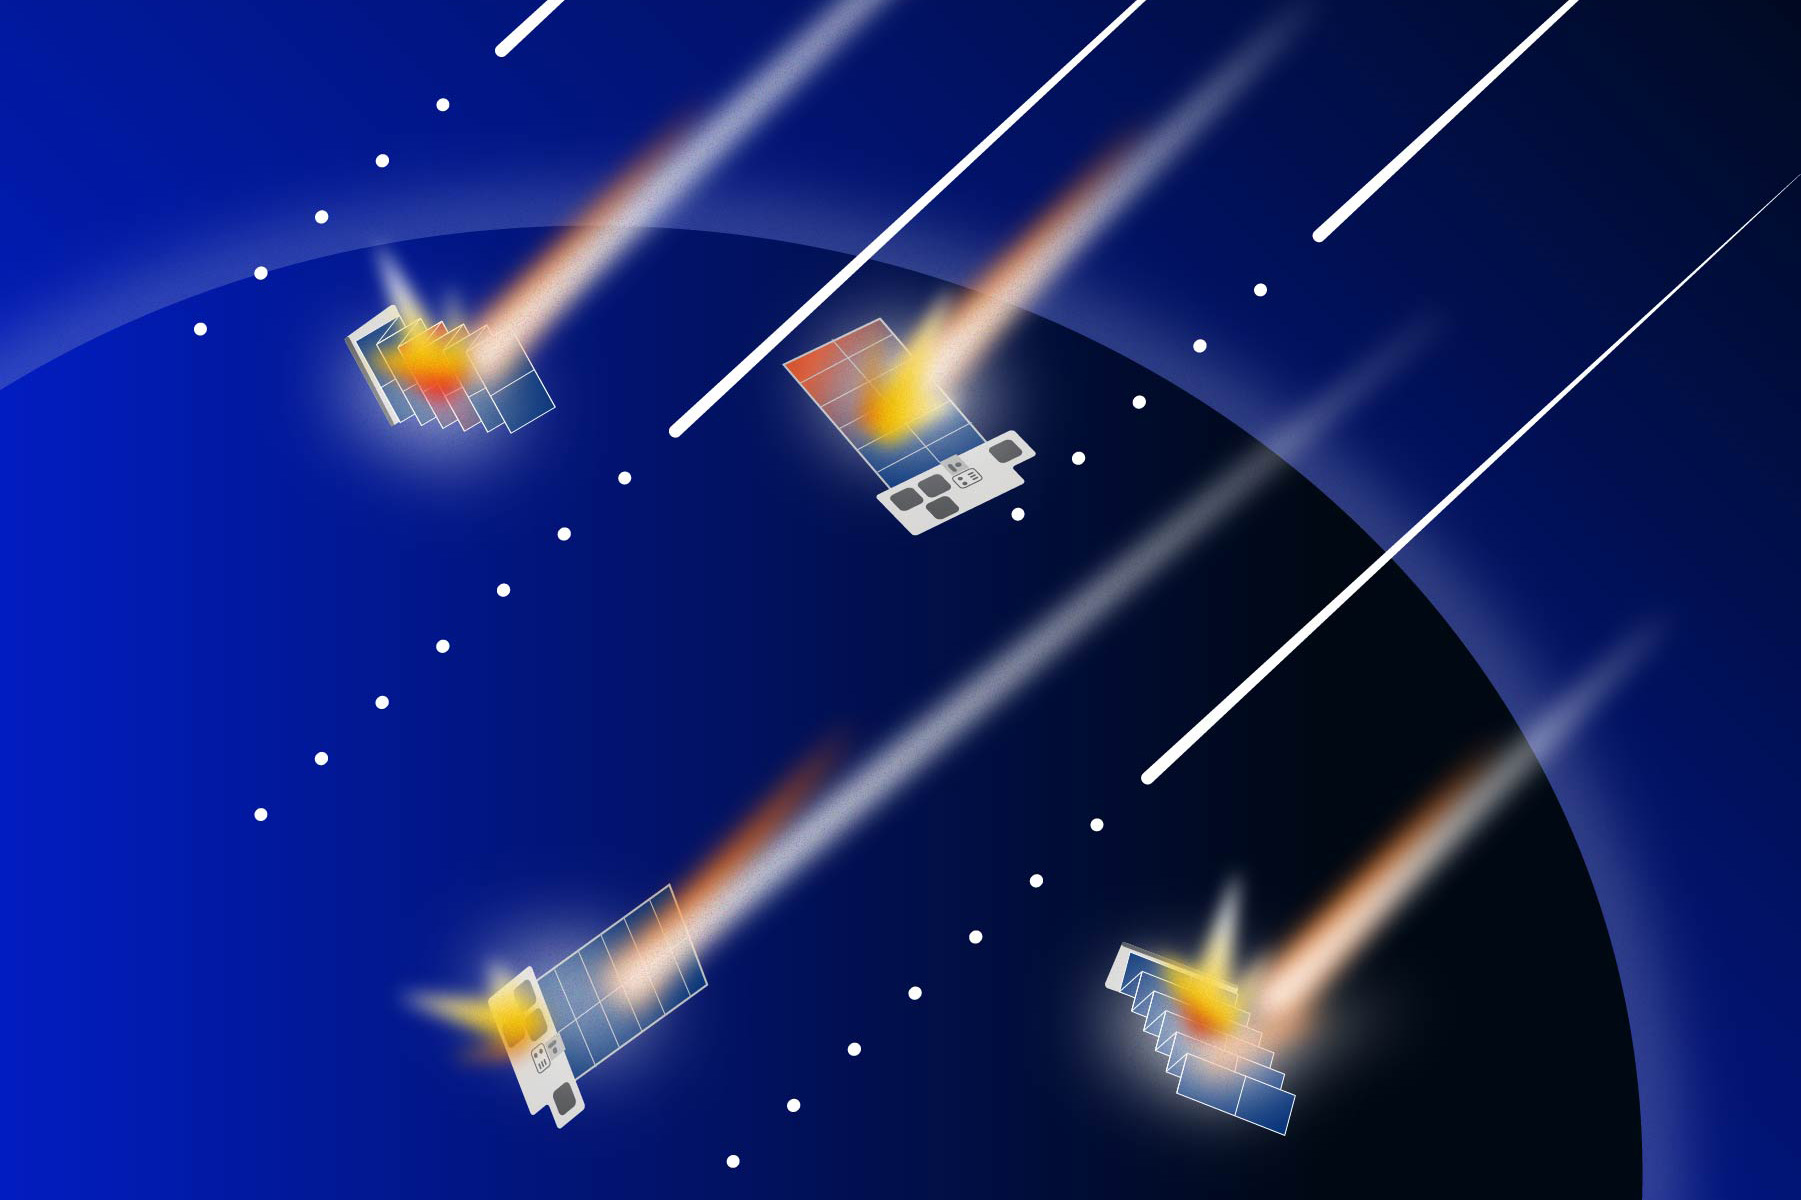 Illustration of satellites burning up in the atmosphere due to a geospace storm